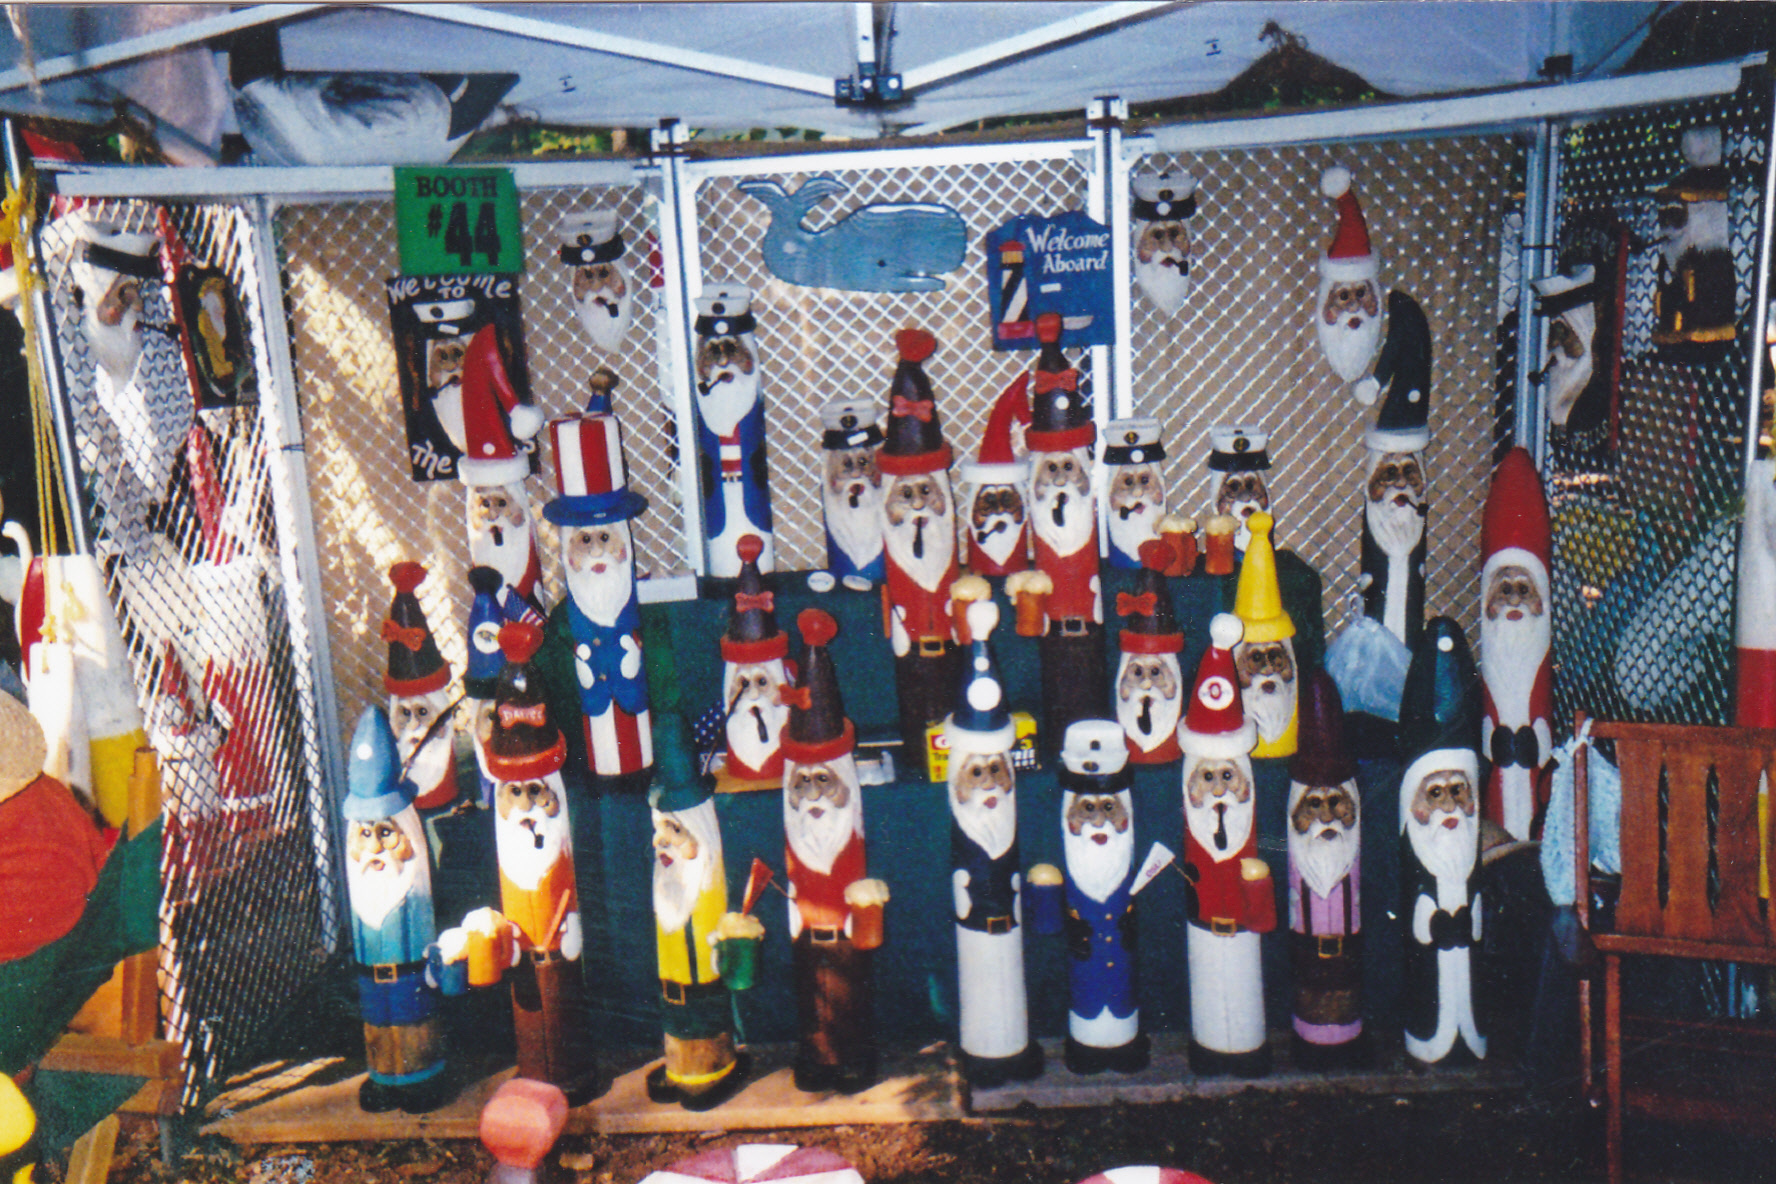 Santa Claus sculptures made out of wood wearing different holiday and ethnic clothing